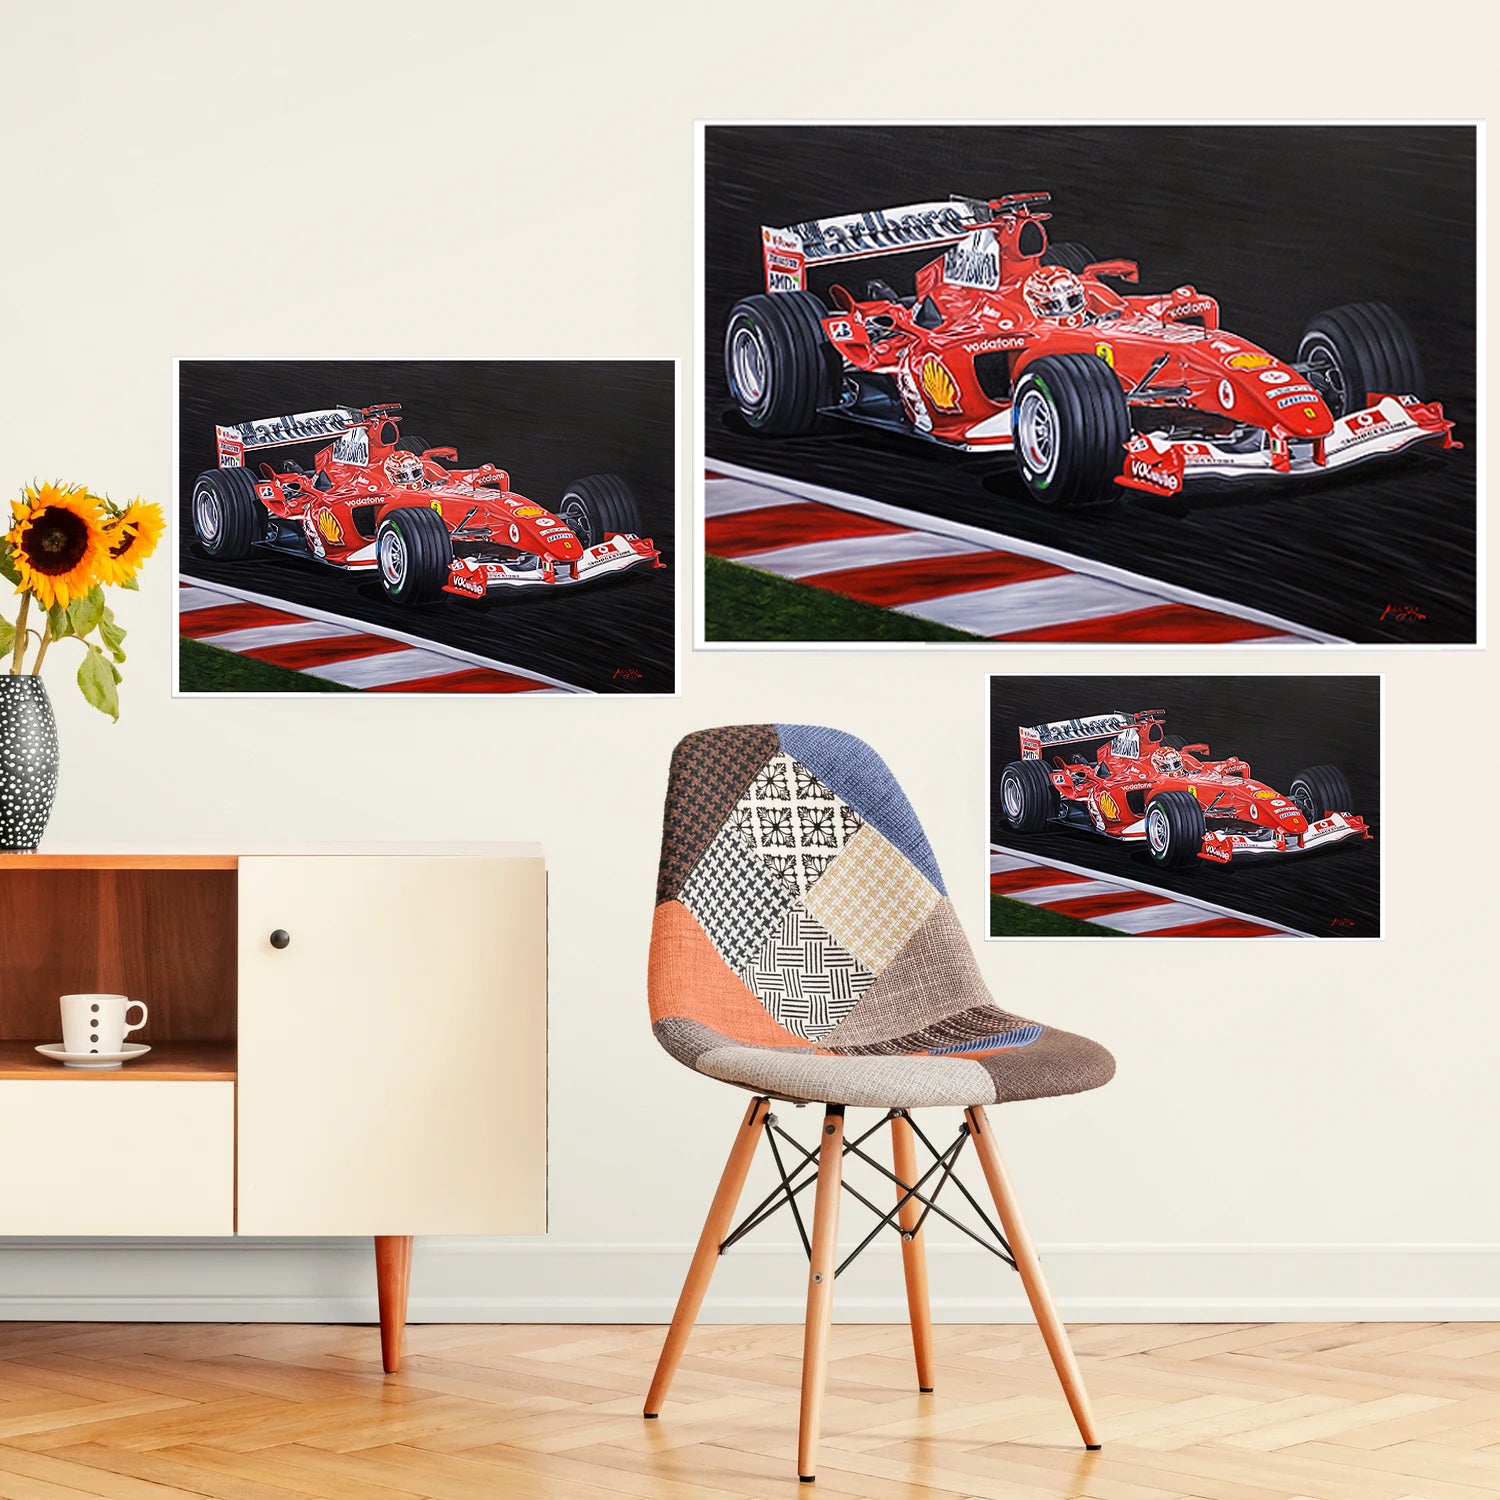 M Schumacher F1 F2004 Painting Limited Edition Canvas Print